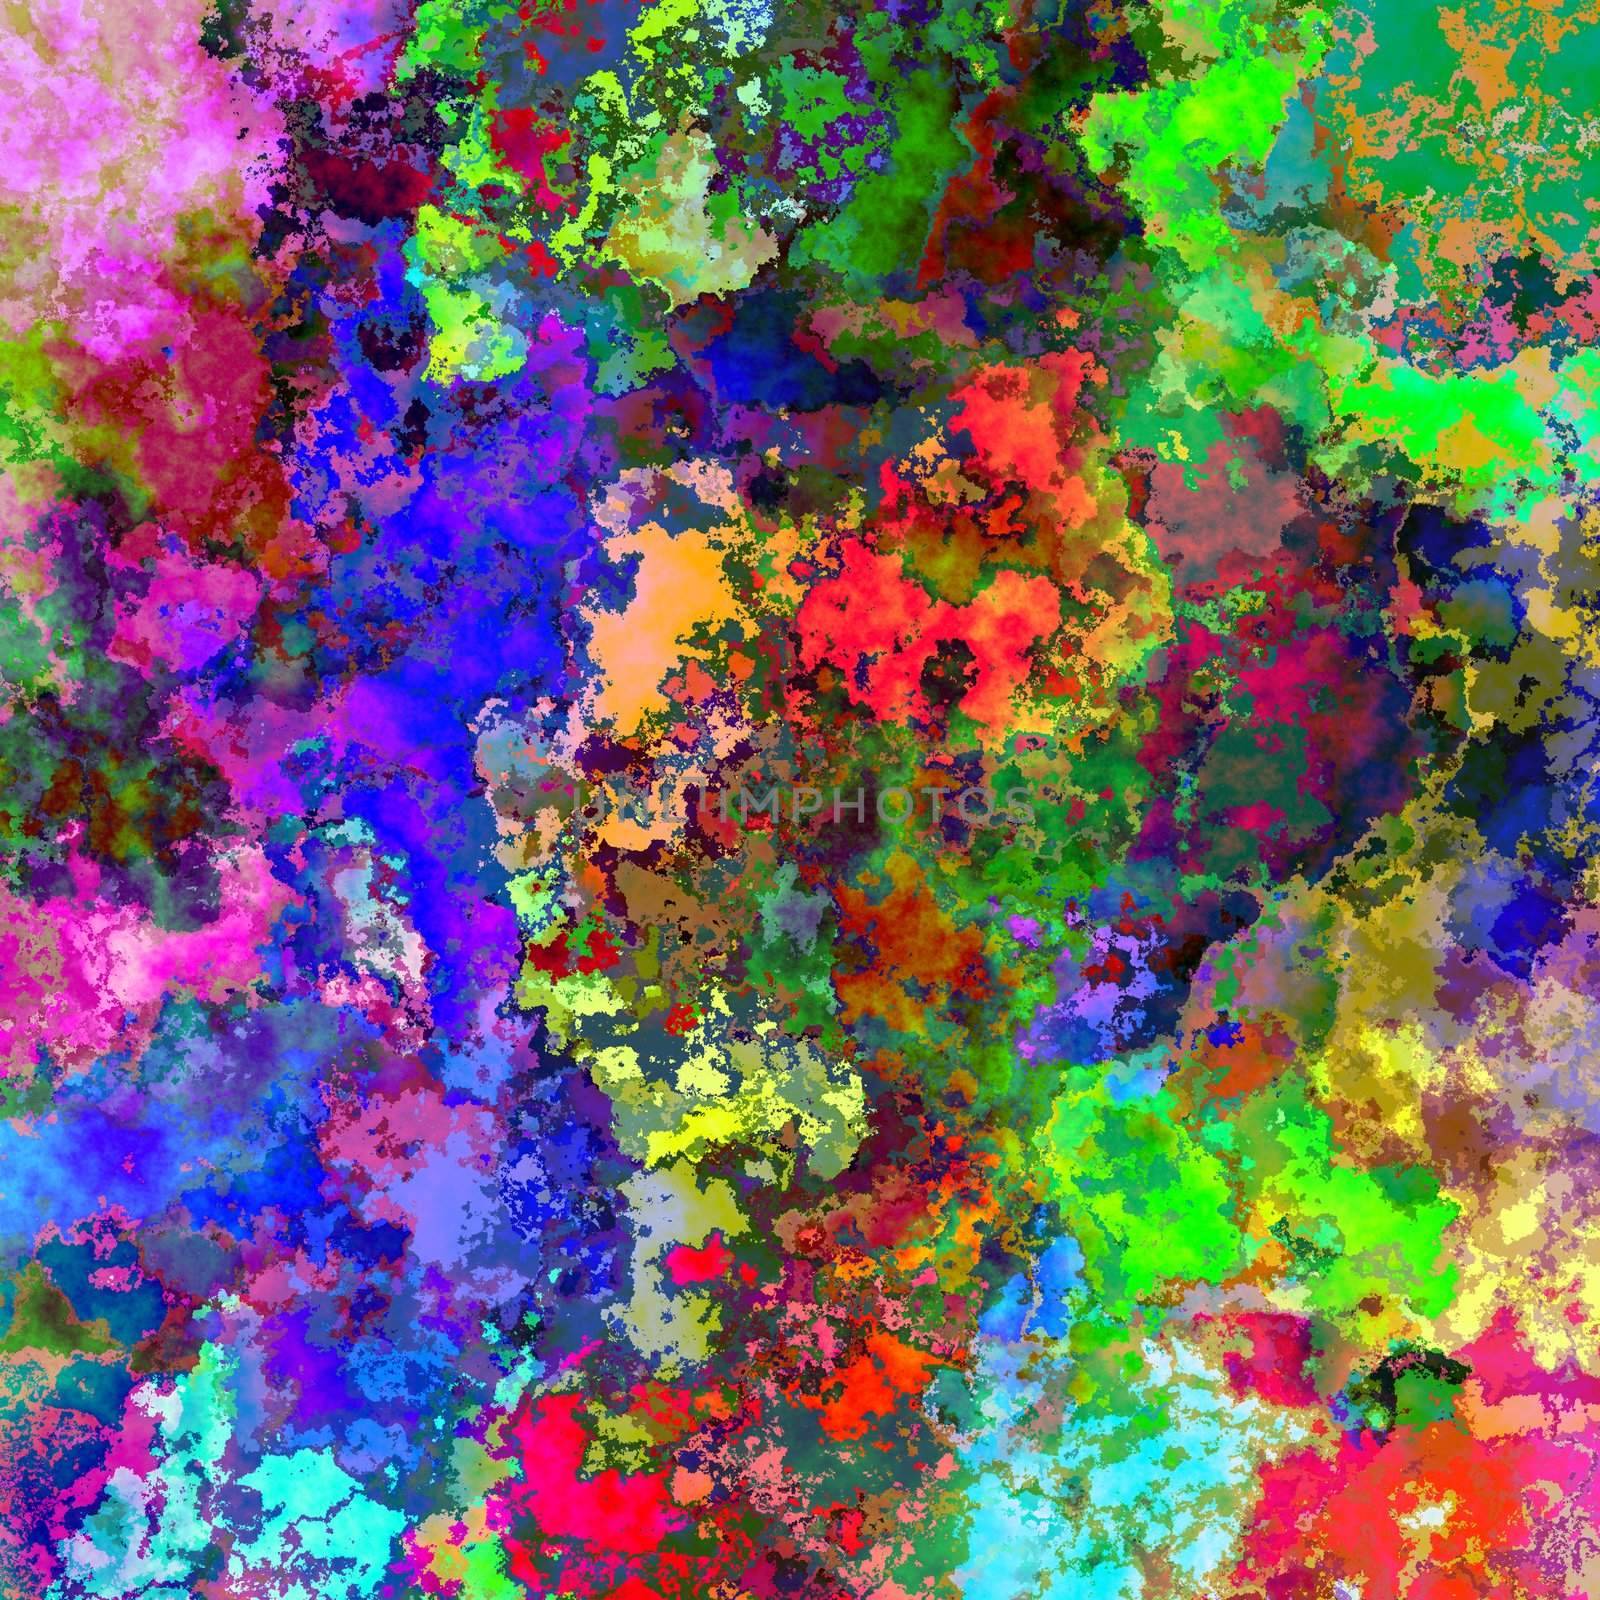 abstract vibrant texture in many bright colors